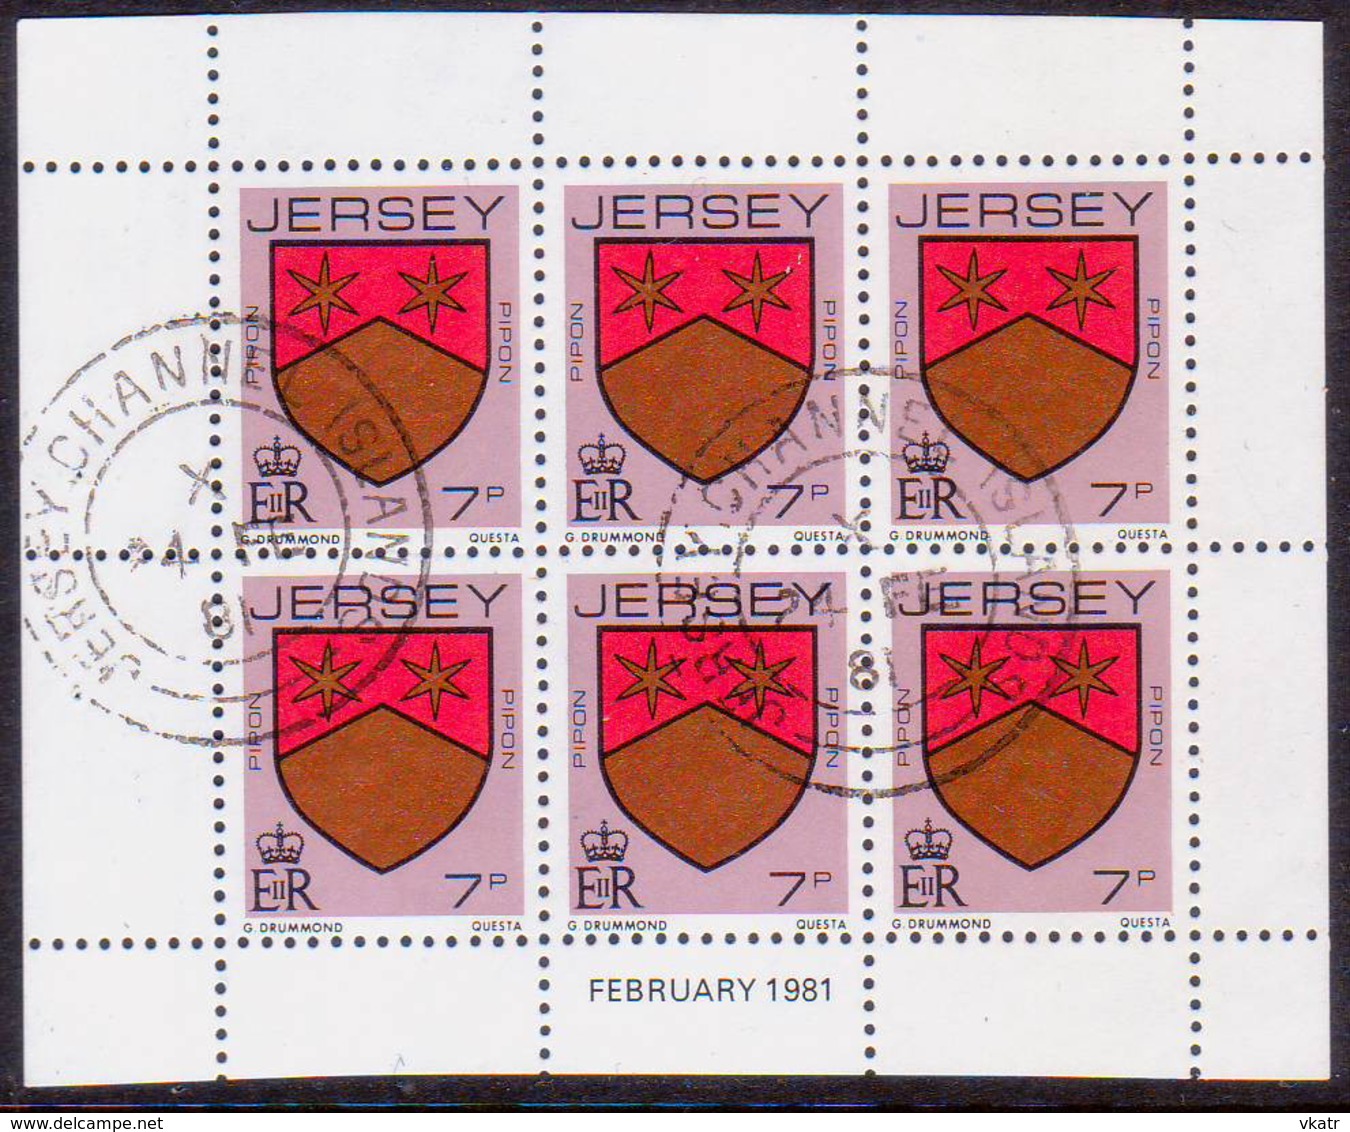 JERSEY 1981 SG #256a 7p Booklet Pane Of 6 Used Perf.14 - Jersey